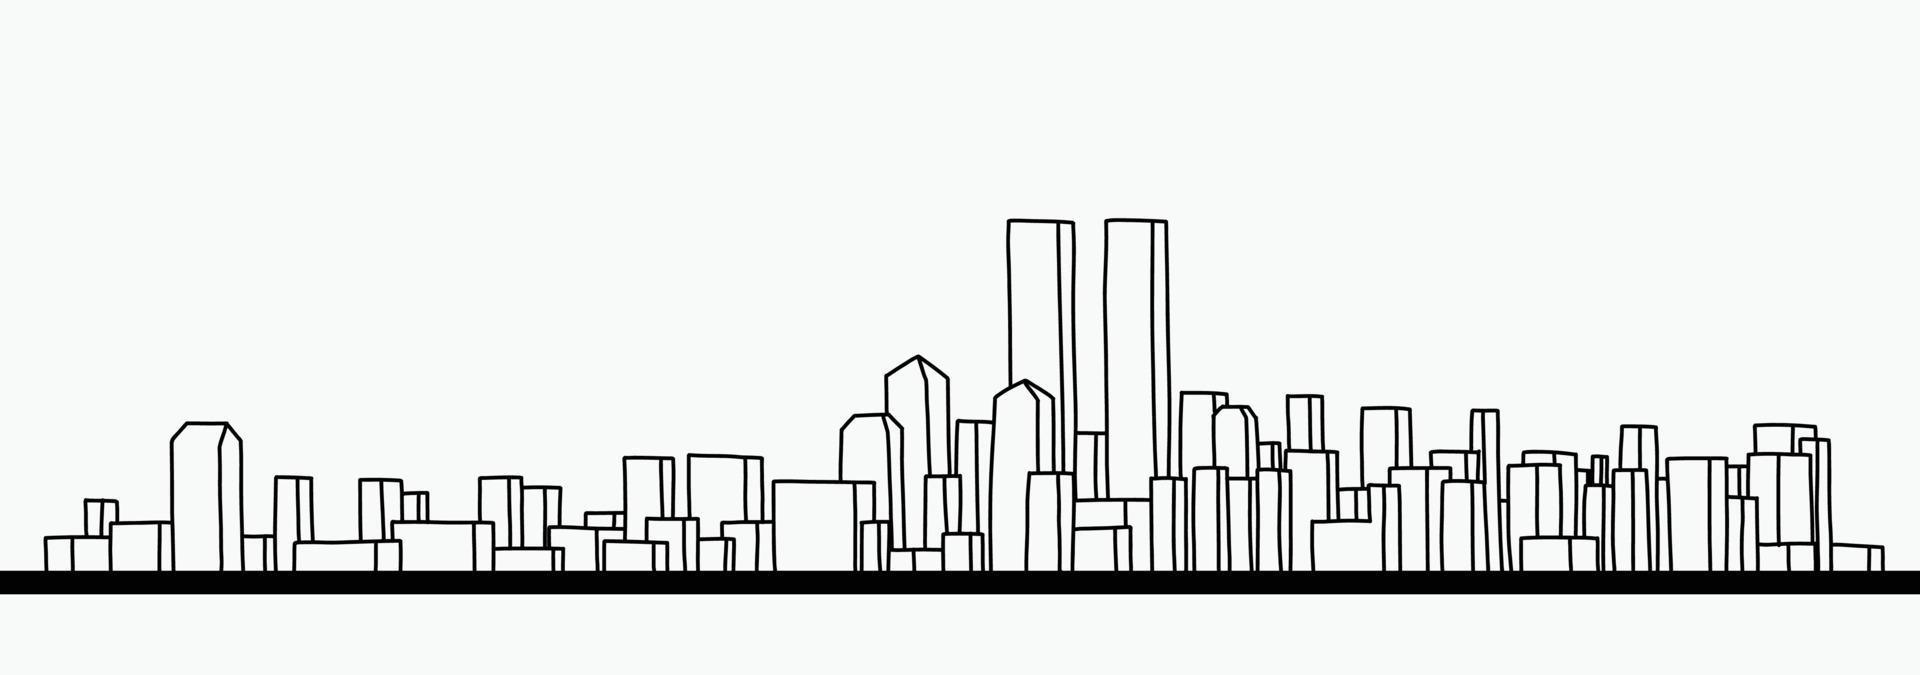 Modern cityscape skyline outline doodle drawing on white background. vector